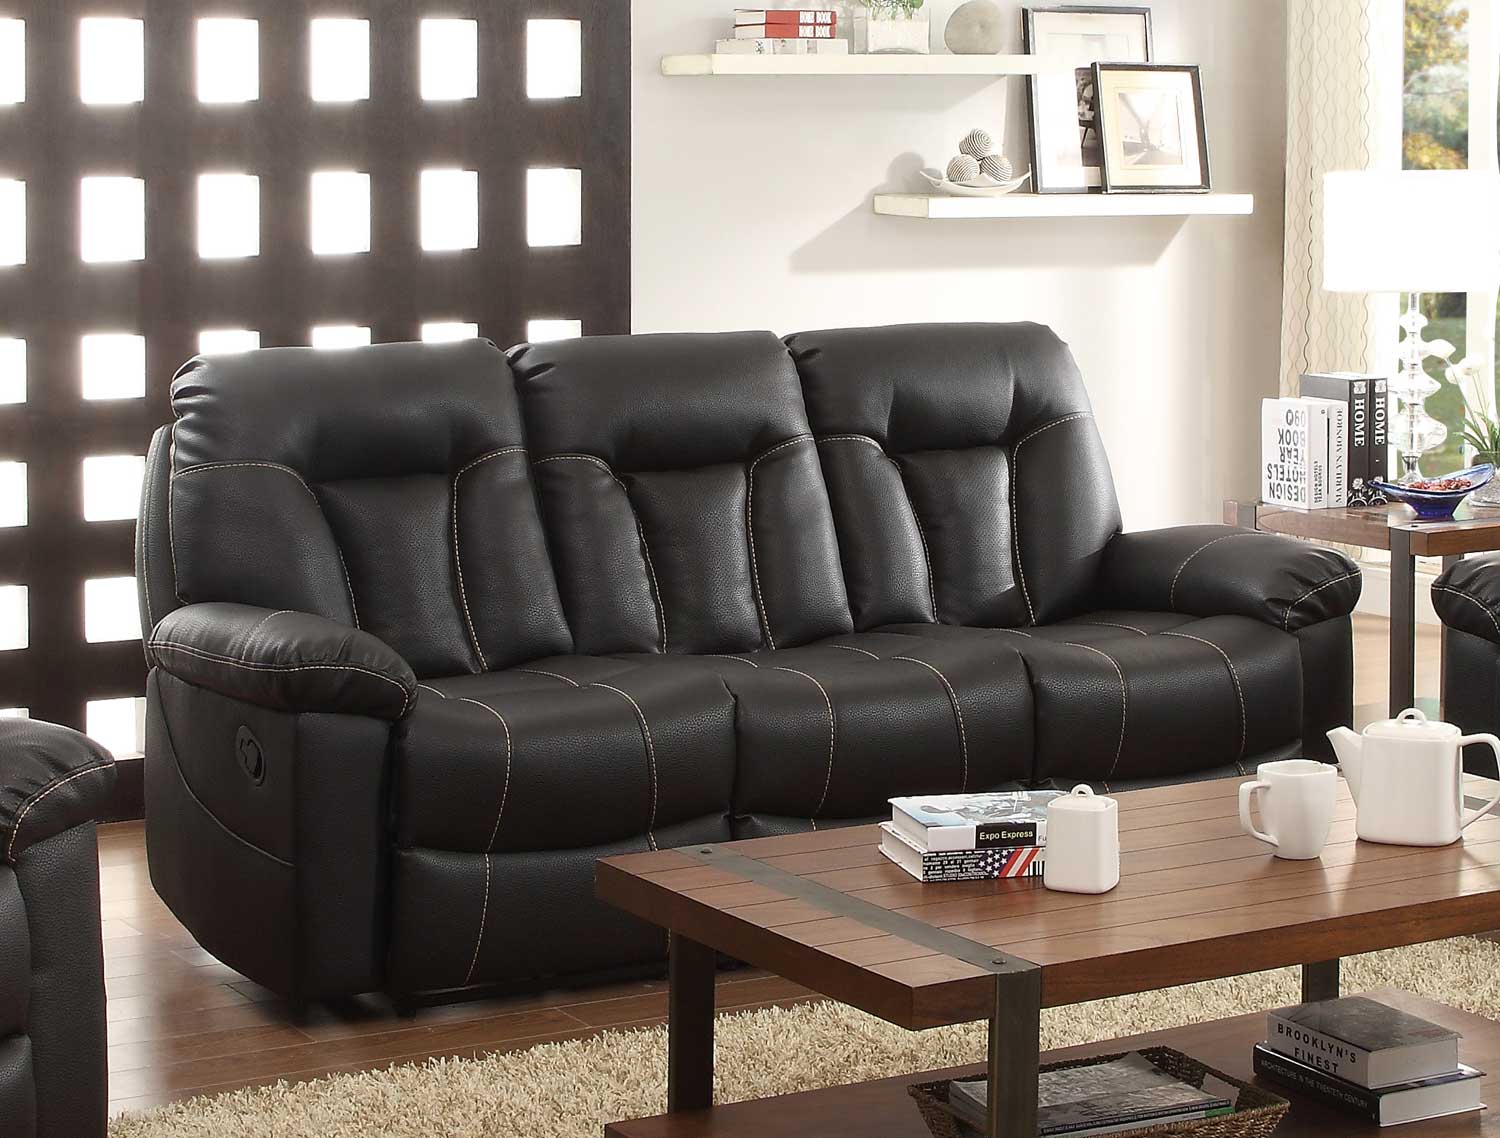 Homelegance Cade Double Reclining Sofa - Black Bonded Leather Match